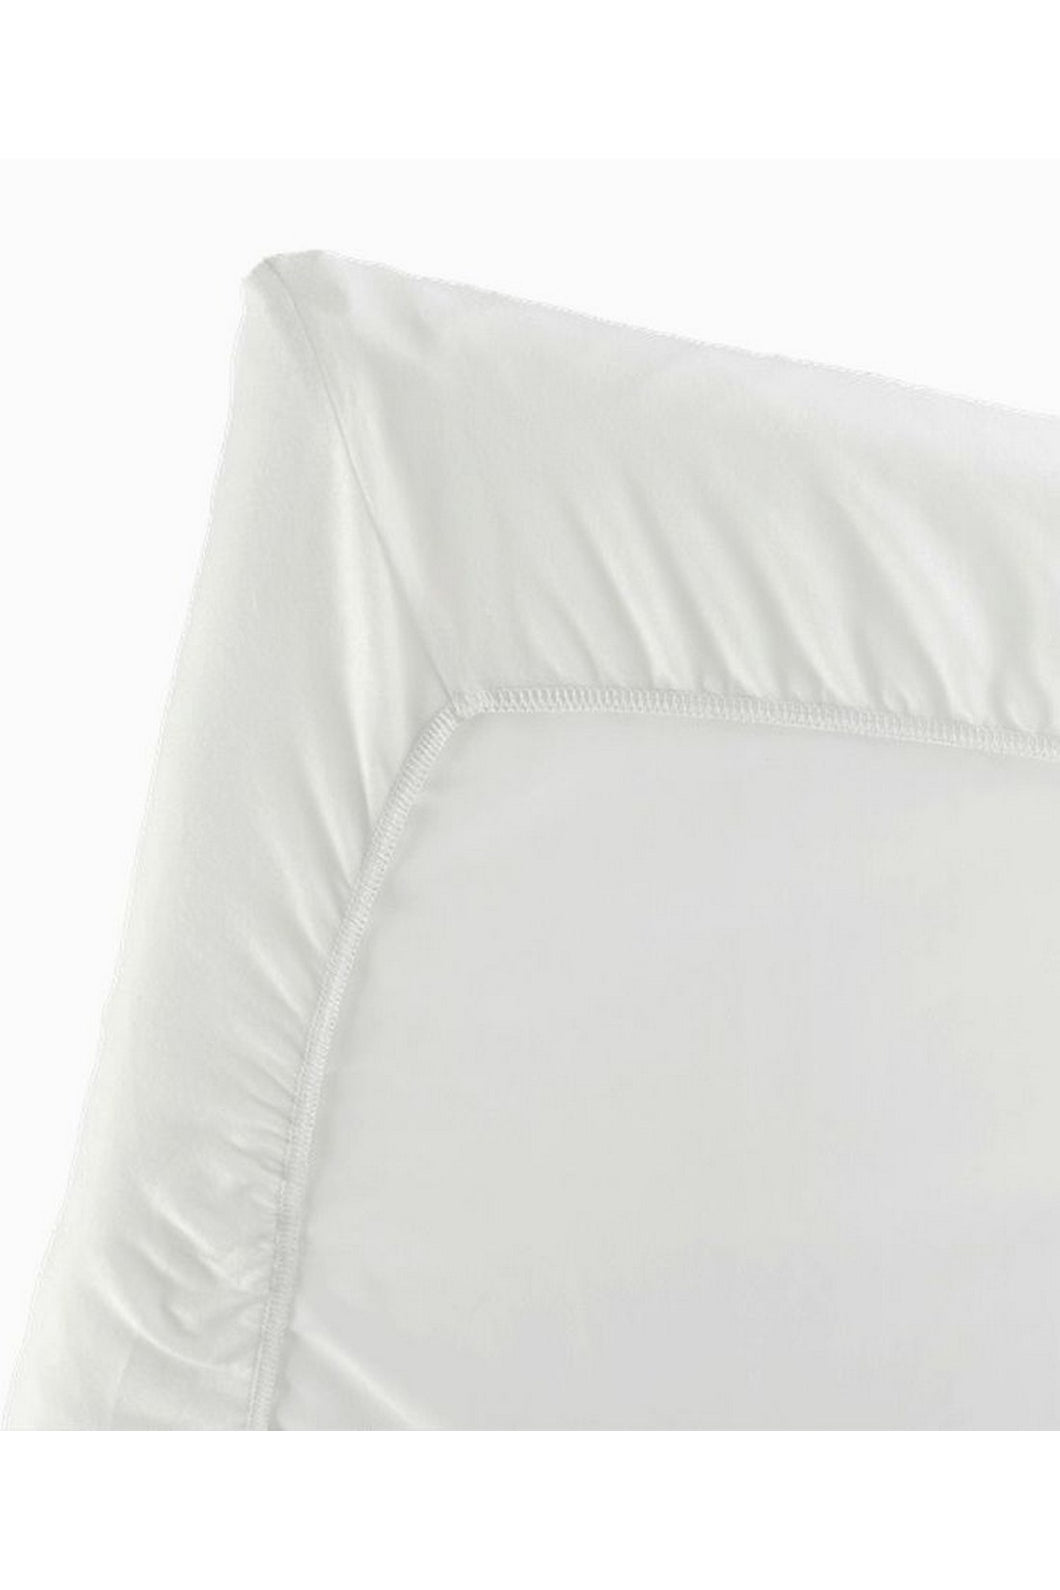 Babybjorn Fitted Sheet For Travel Cot Crib Light